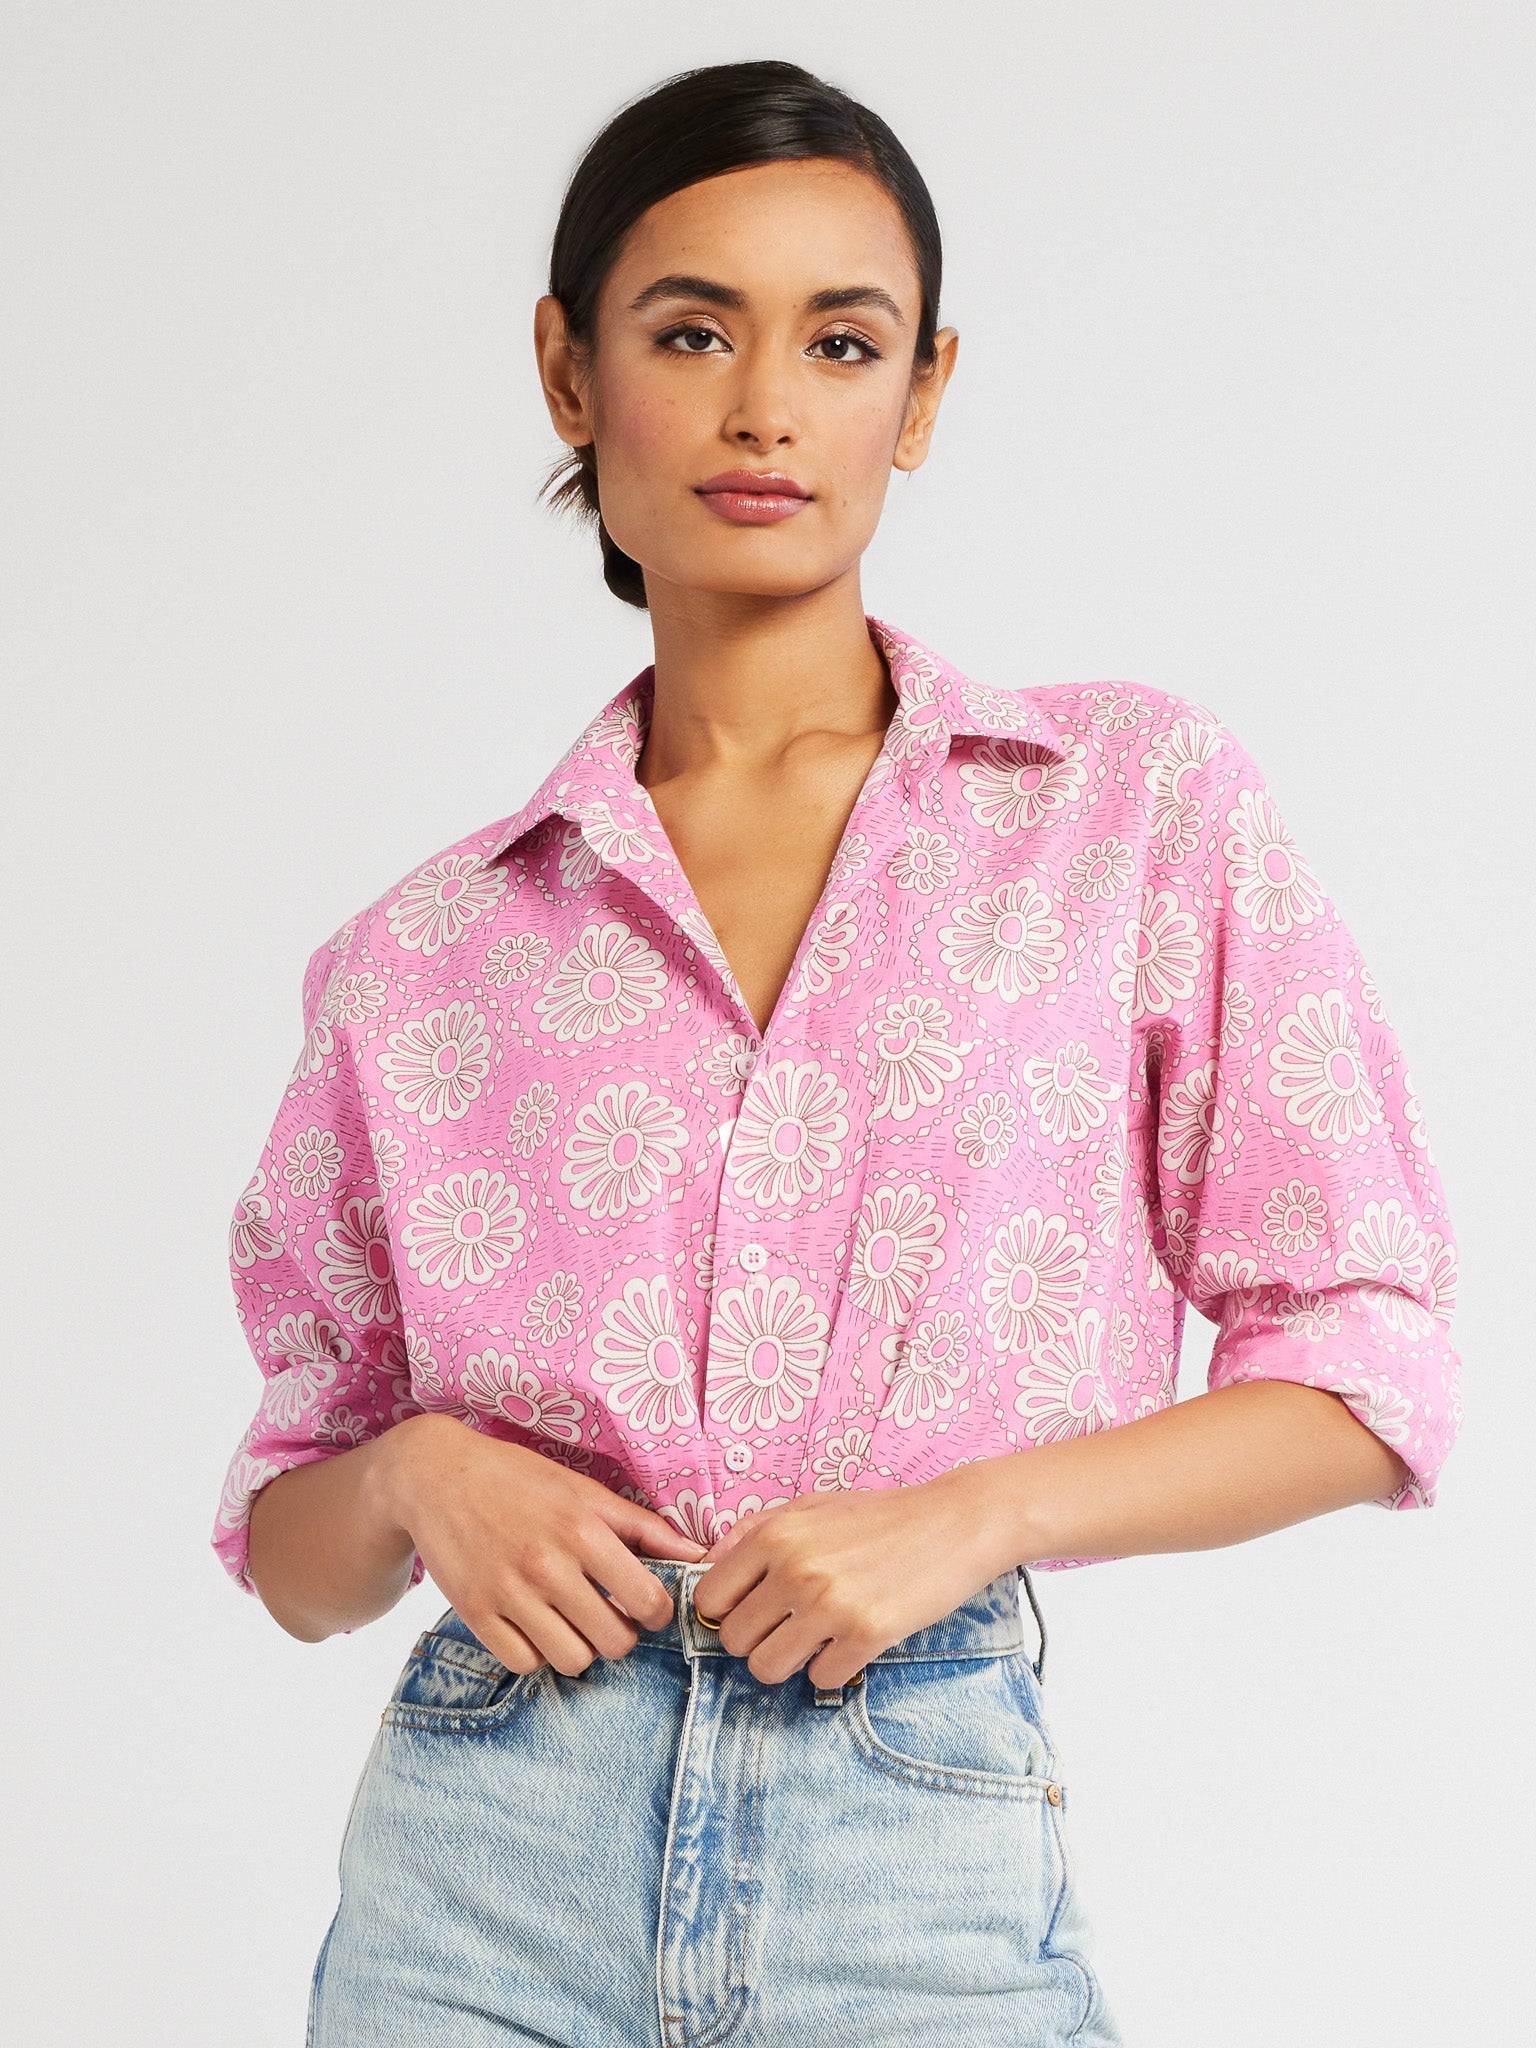 MILLE Clothing Sofia Top in Pink Daisy